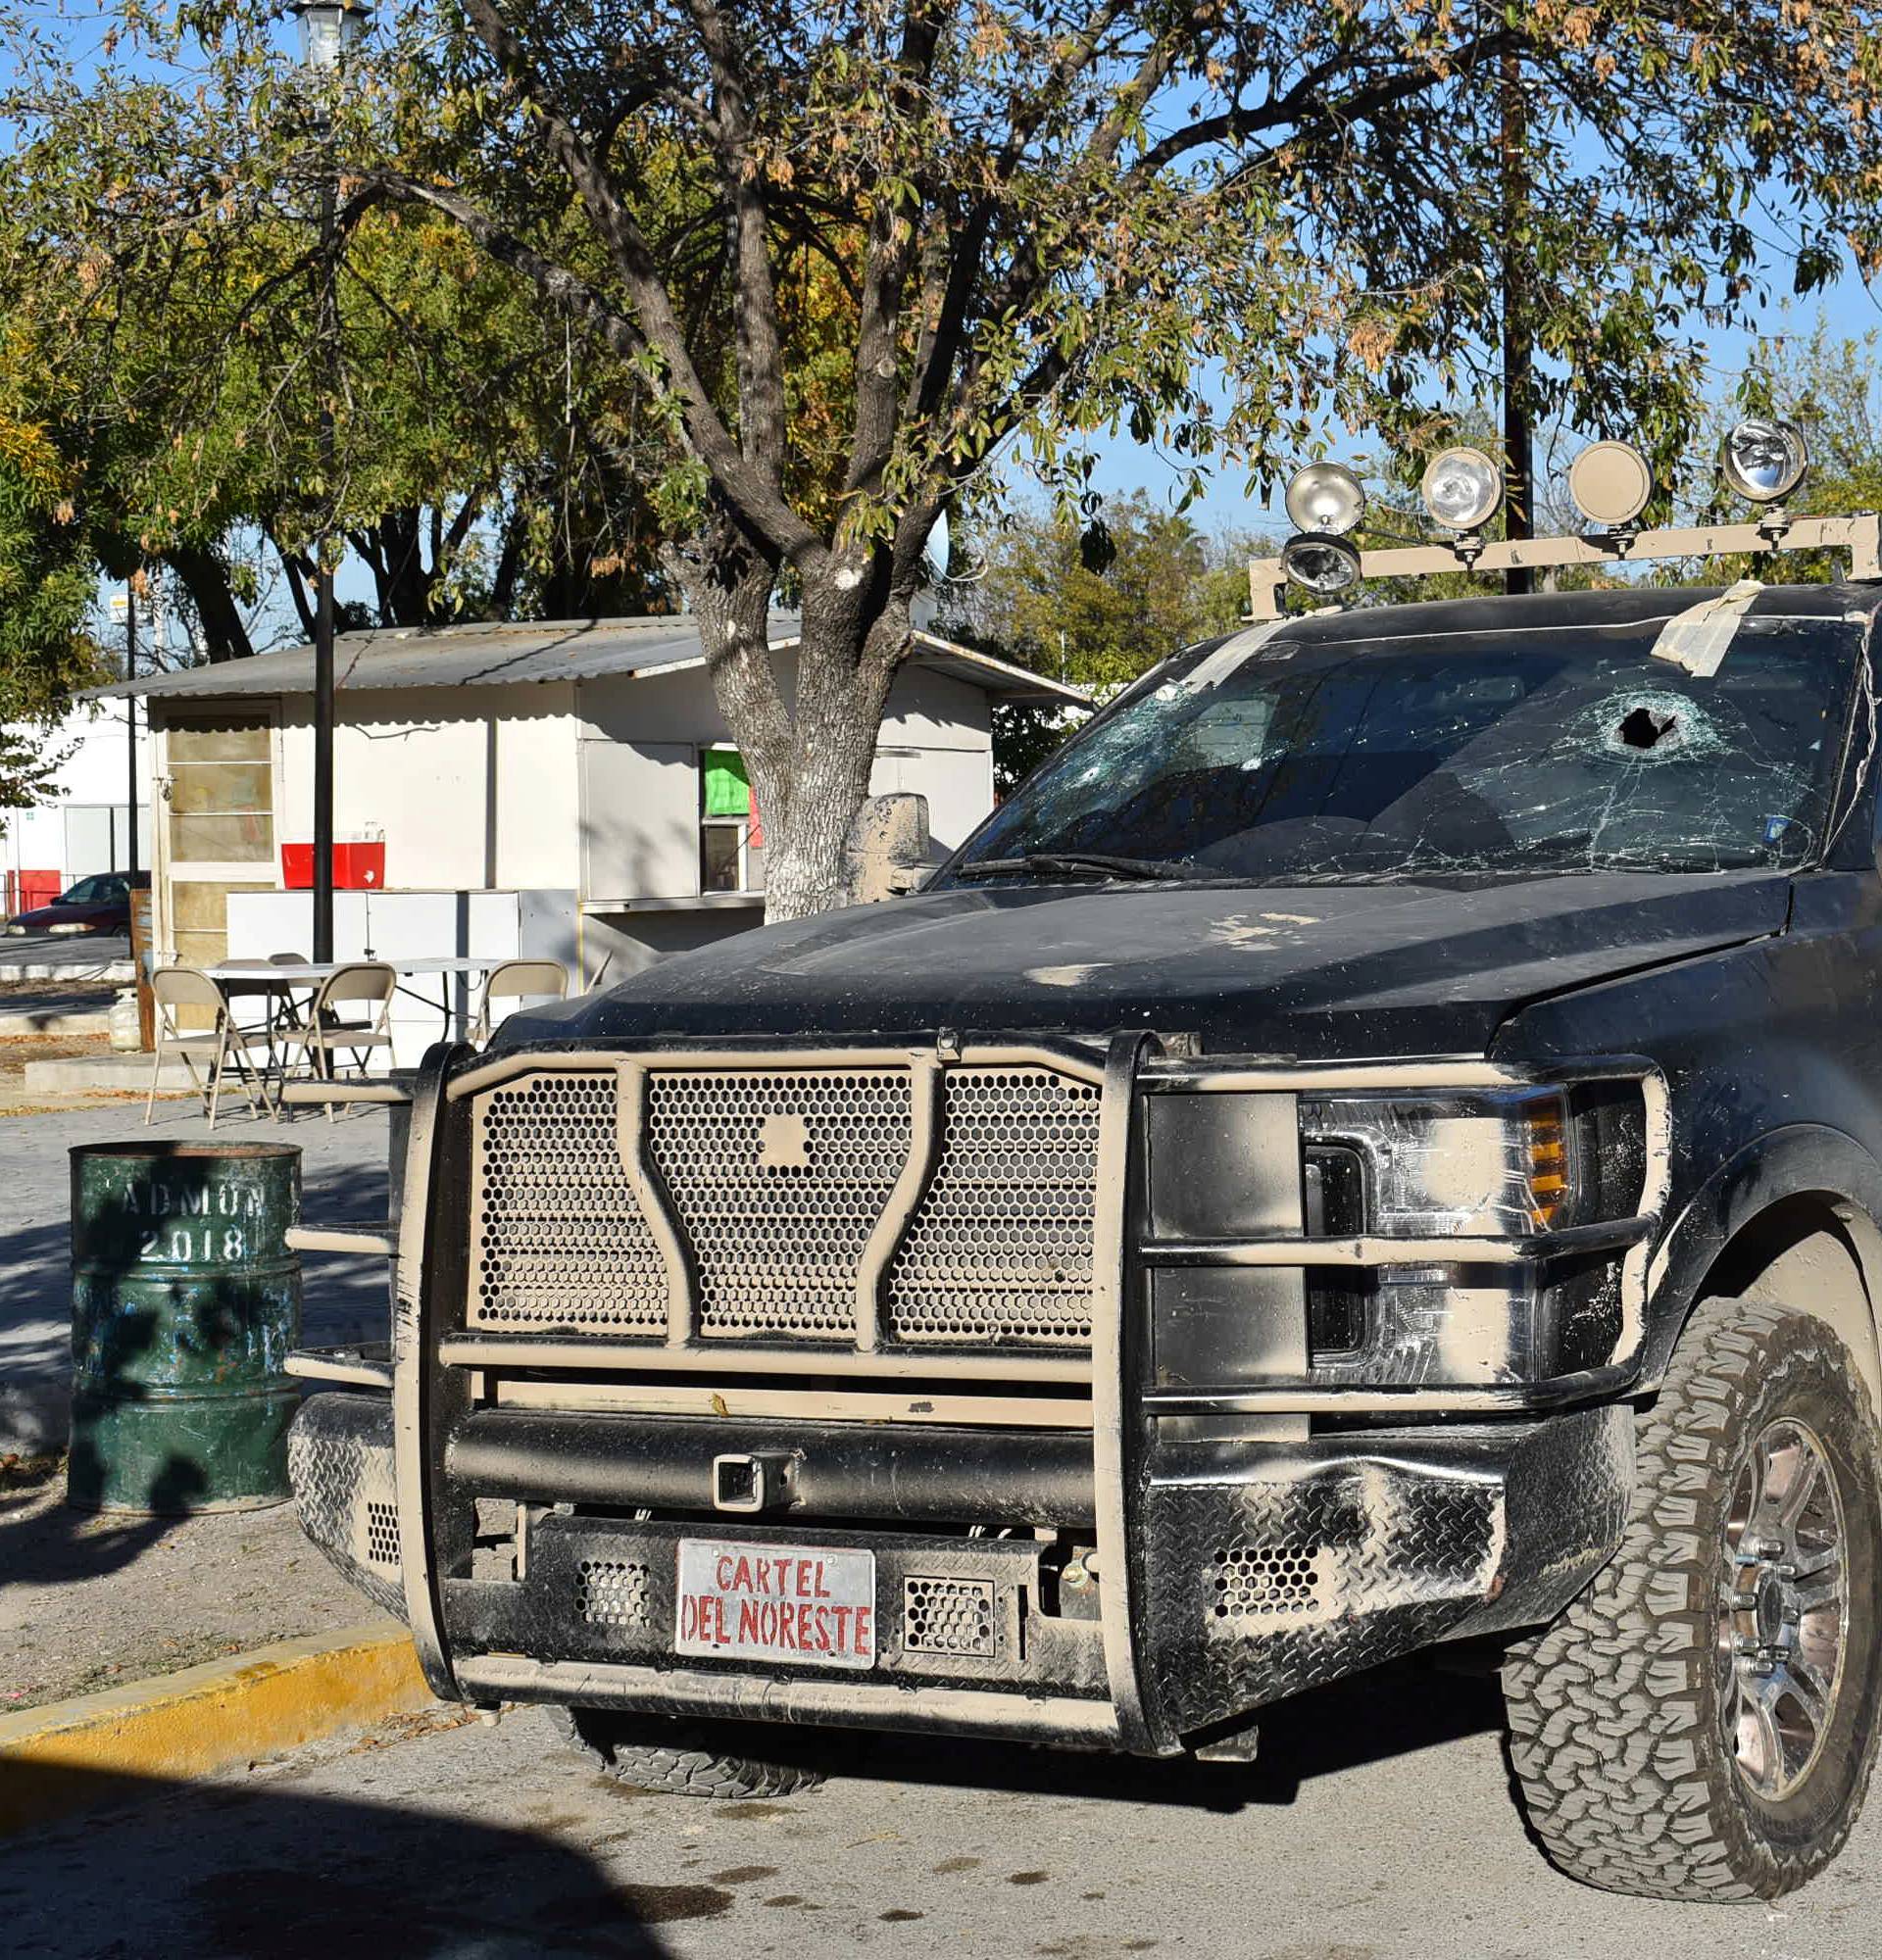 A bullet-riddled pick-up truck is pictured after clashes sparked by suspected cartel gunmen in a northern Mexican town that killed 20 people this weekend, in Villa Union, Coahuila